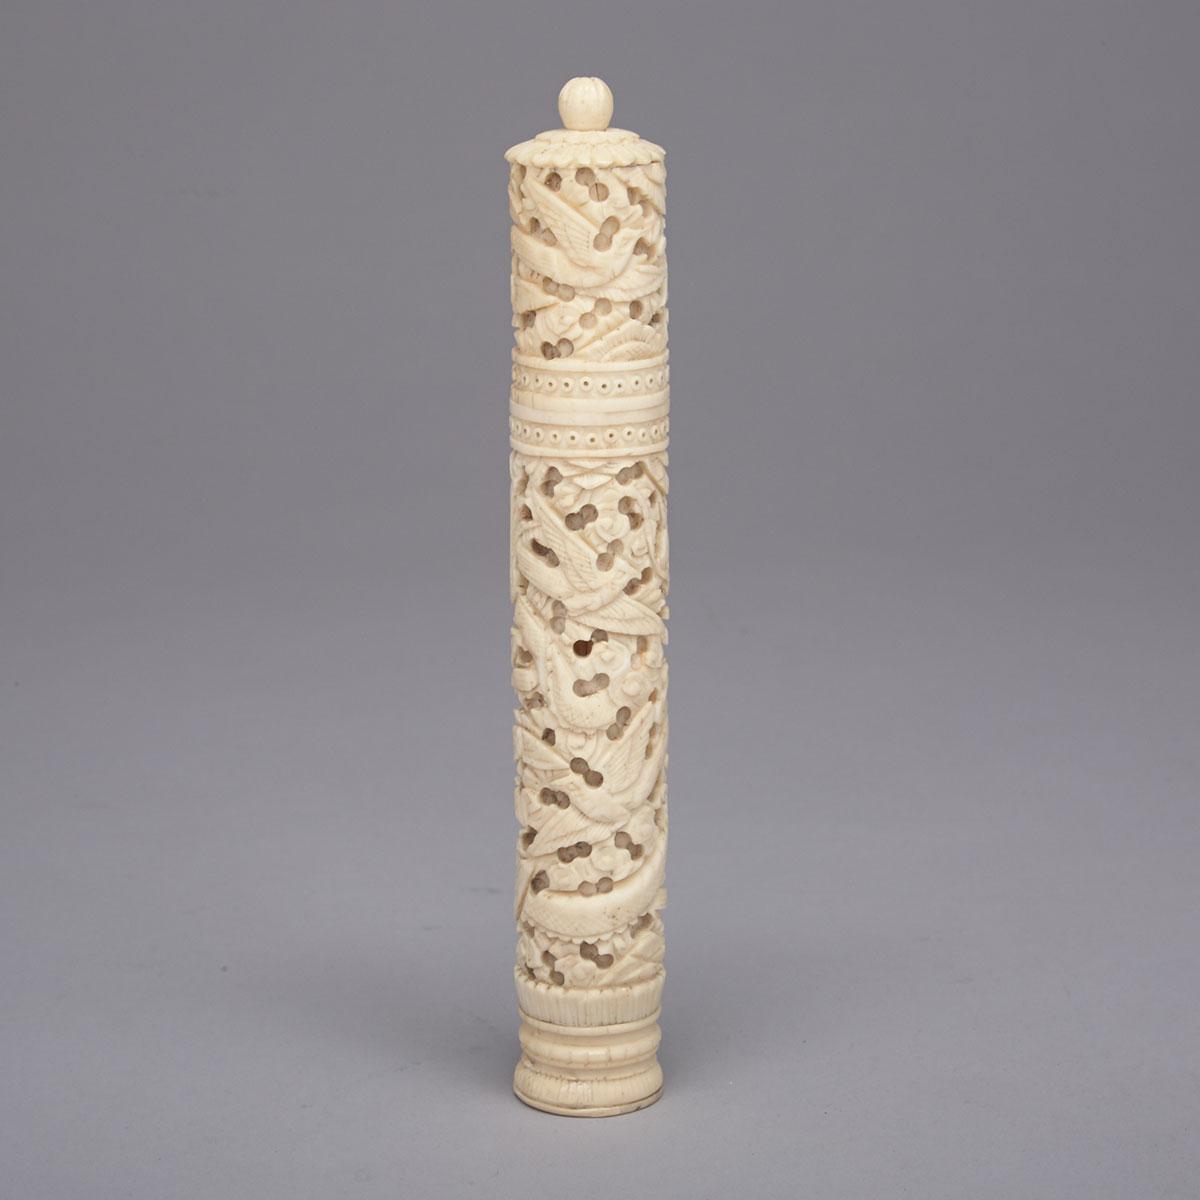 Chinese Export Carved Ivory Bodkin Case, 19th century